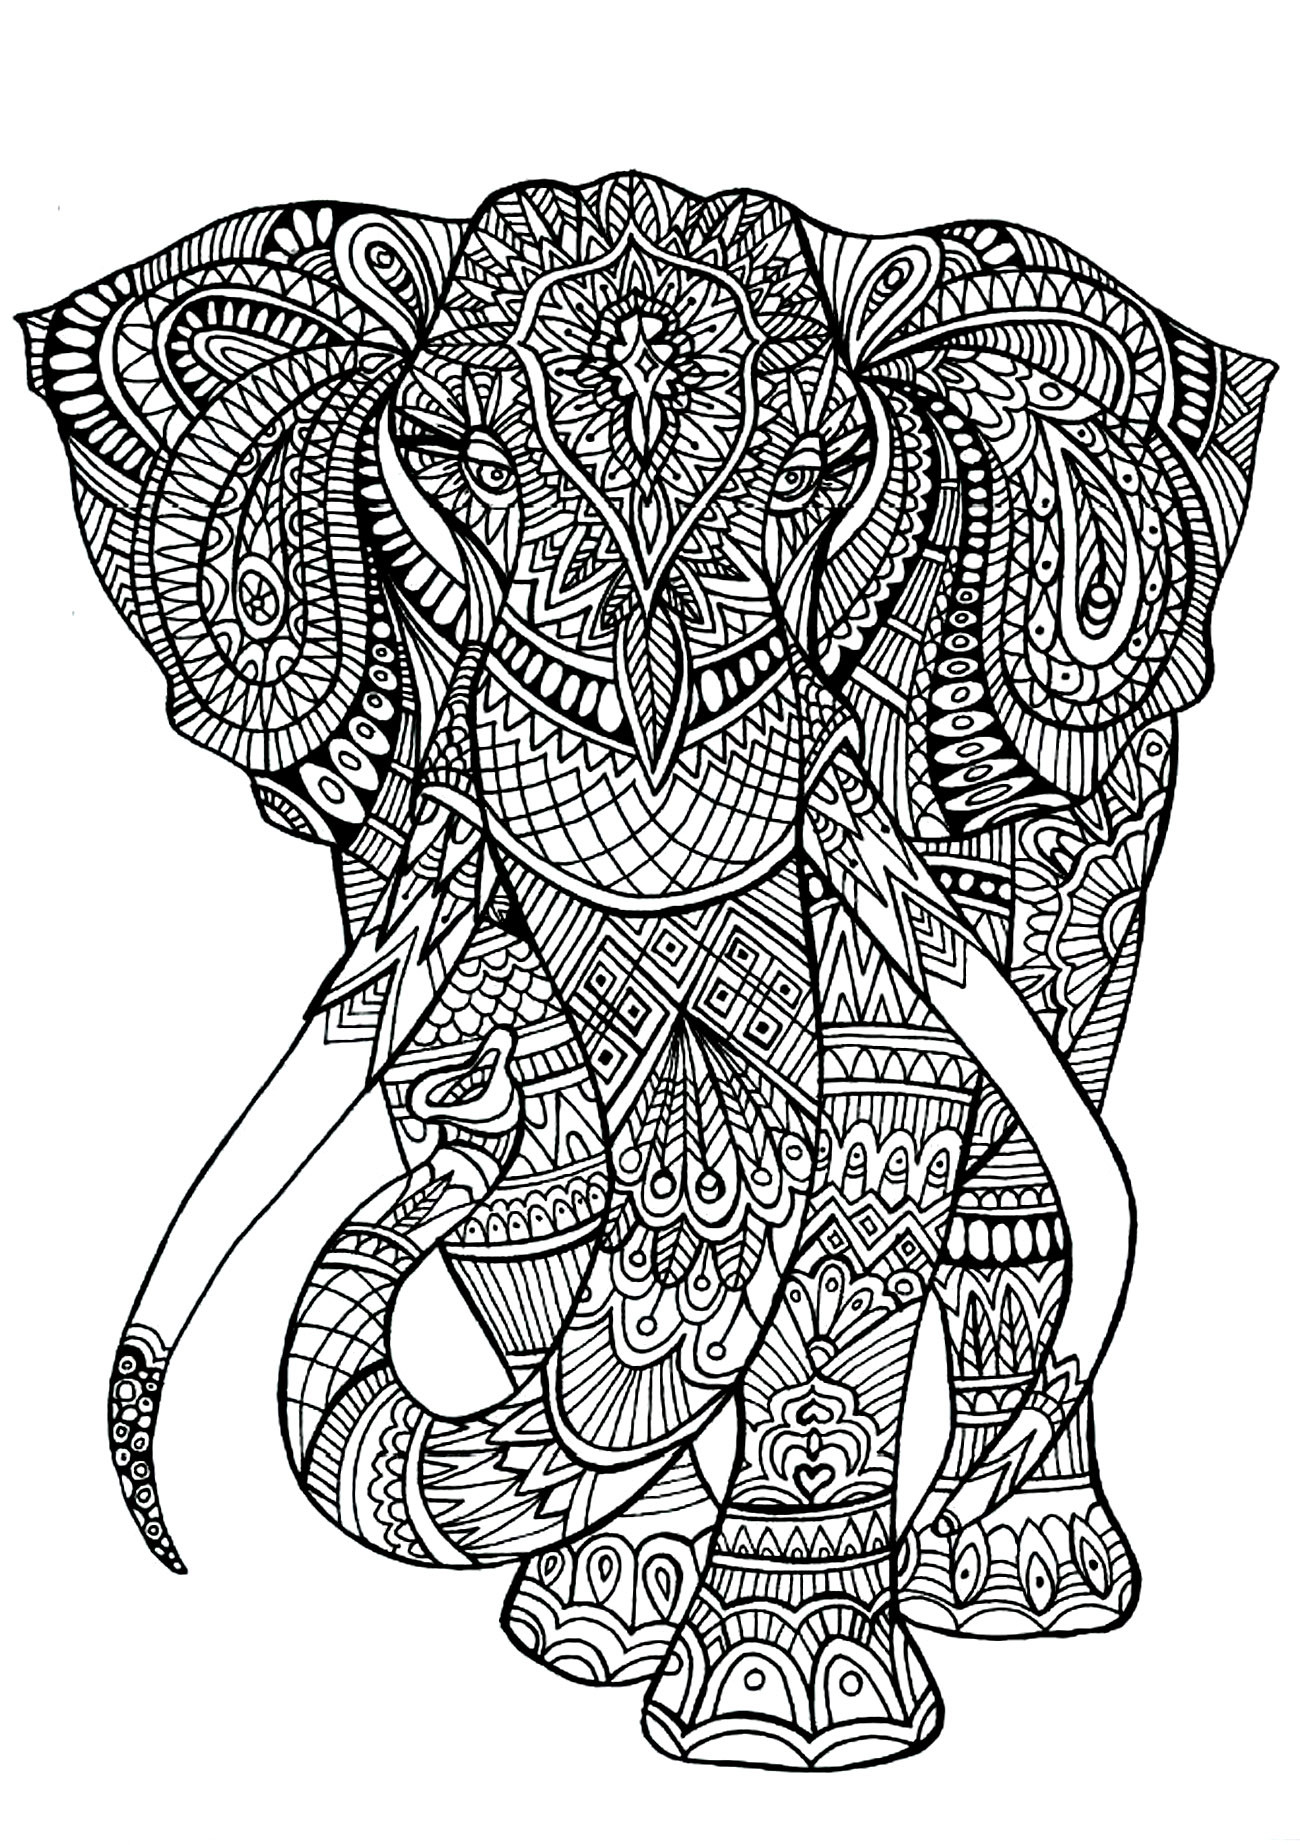 Adult Coloring Pages Animal Patterns
 Elephant patterns